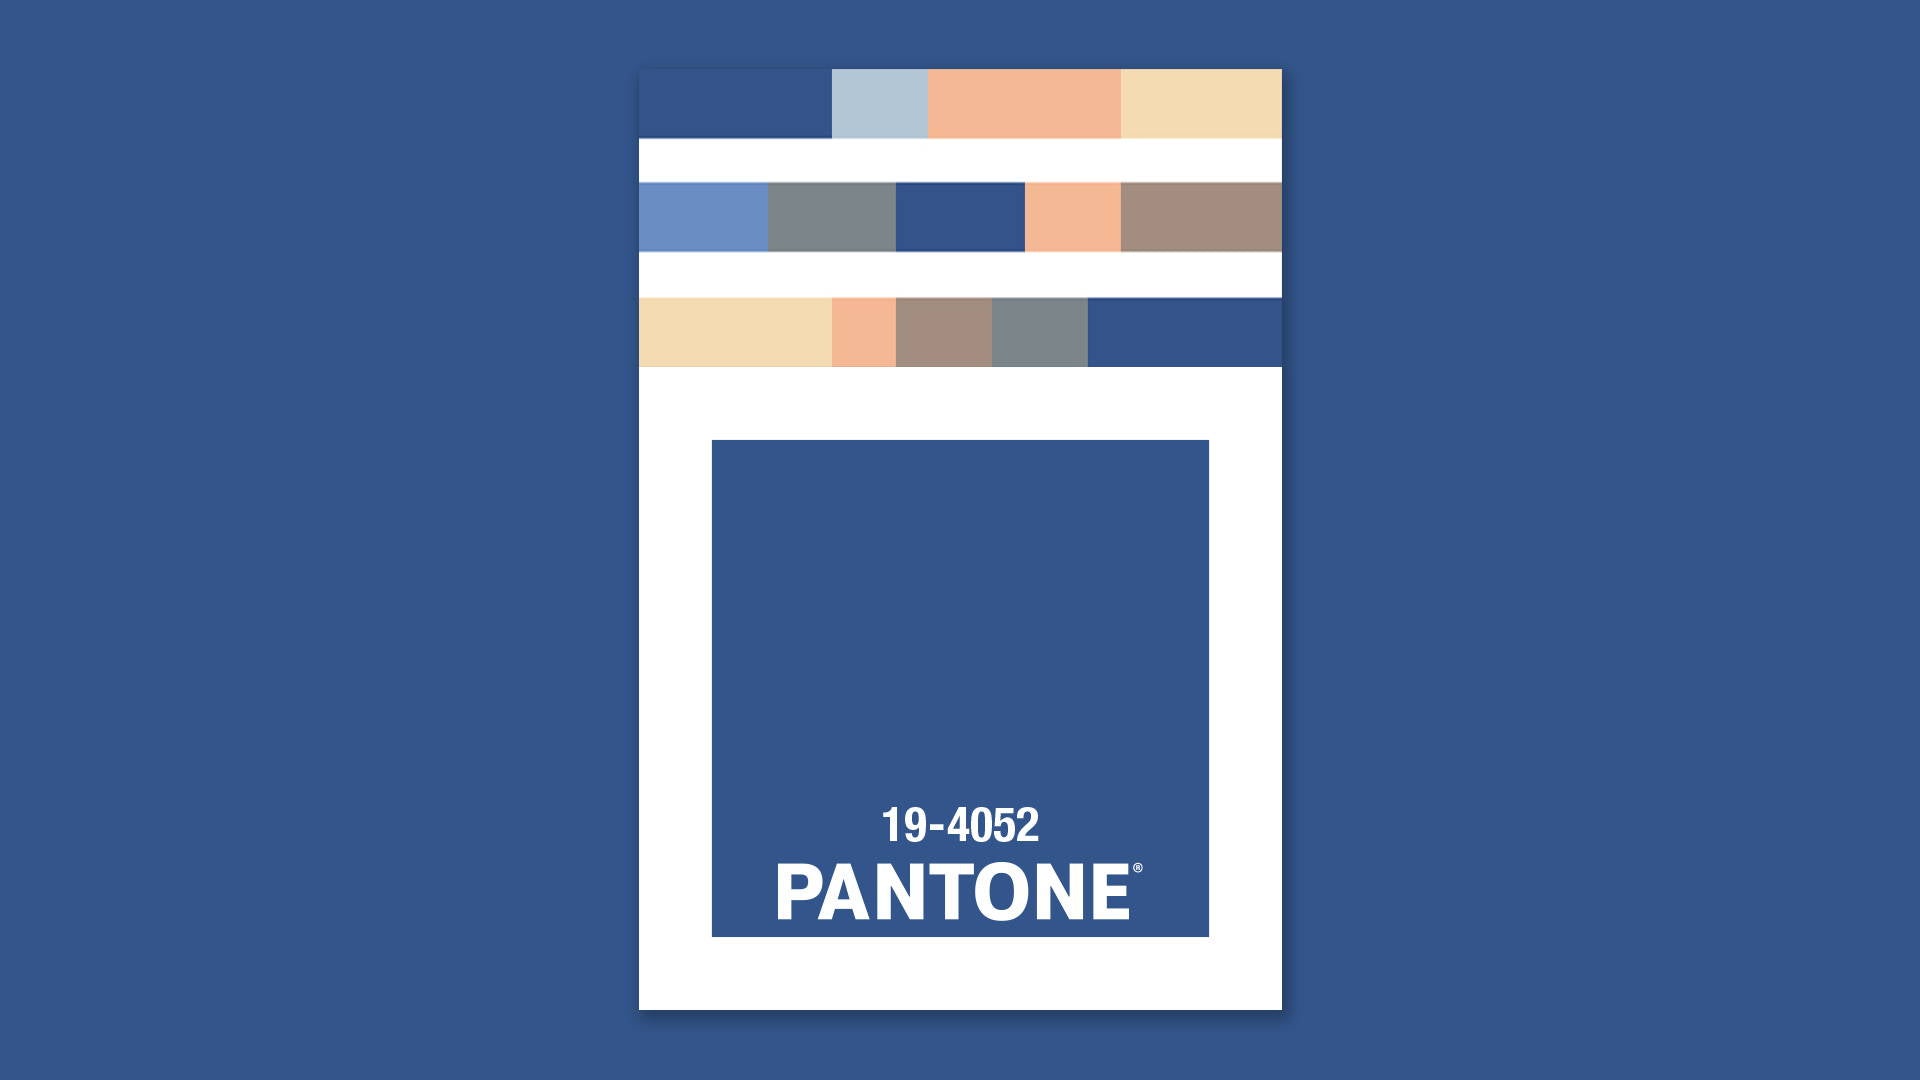 Design Your Room with the 2020 Pantone Color of the Year!